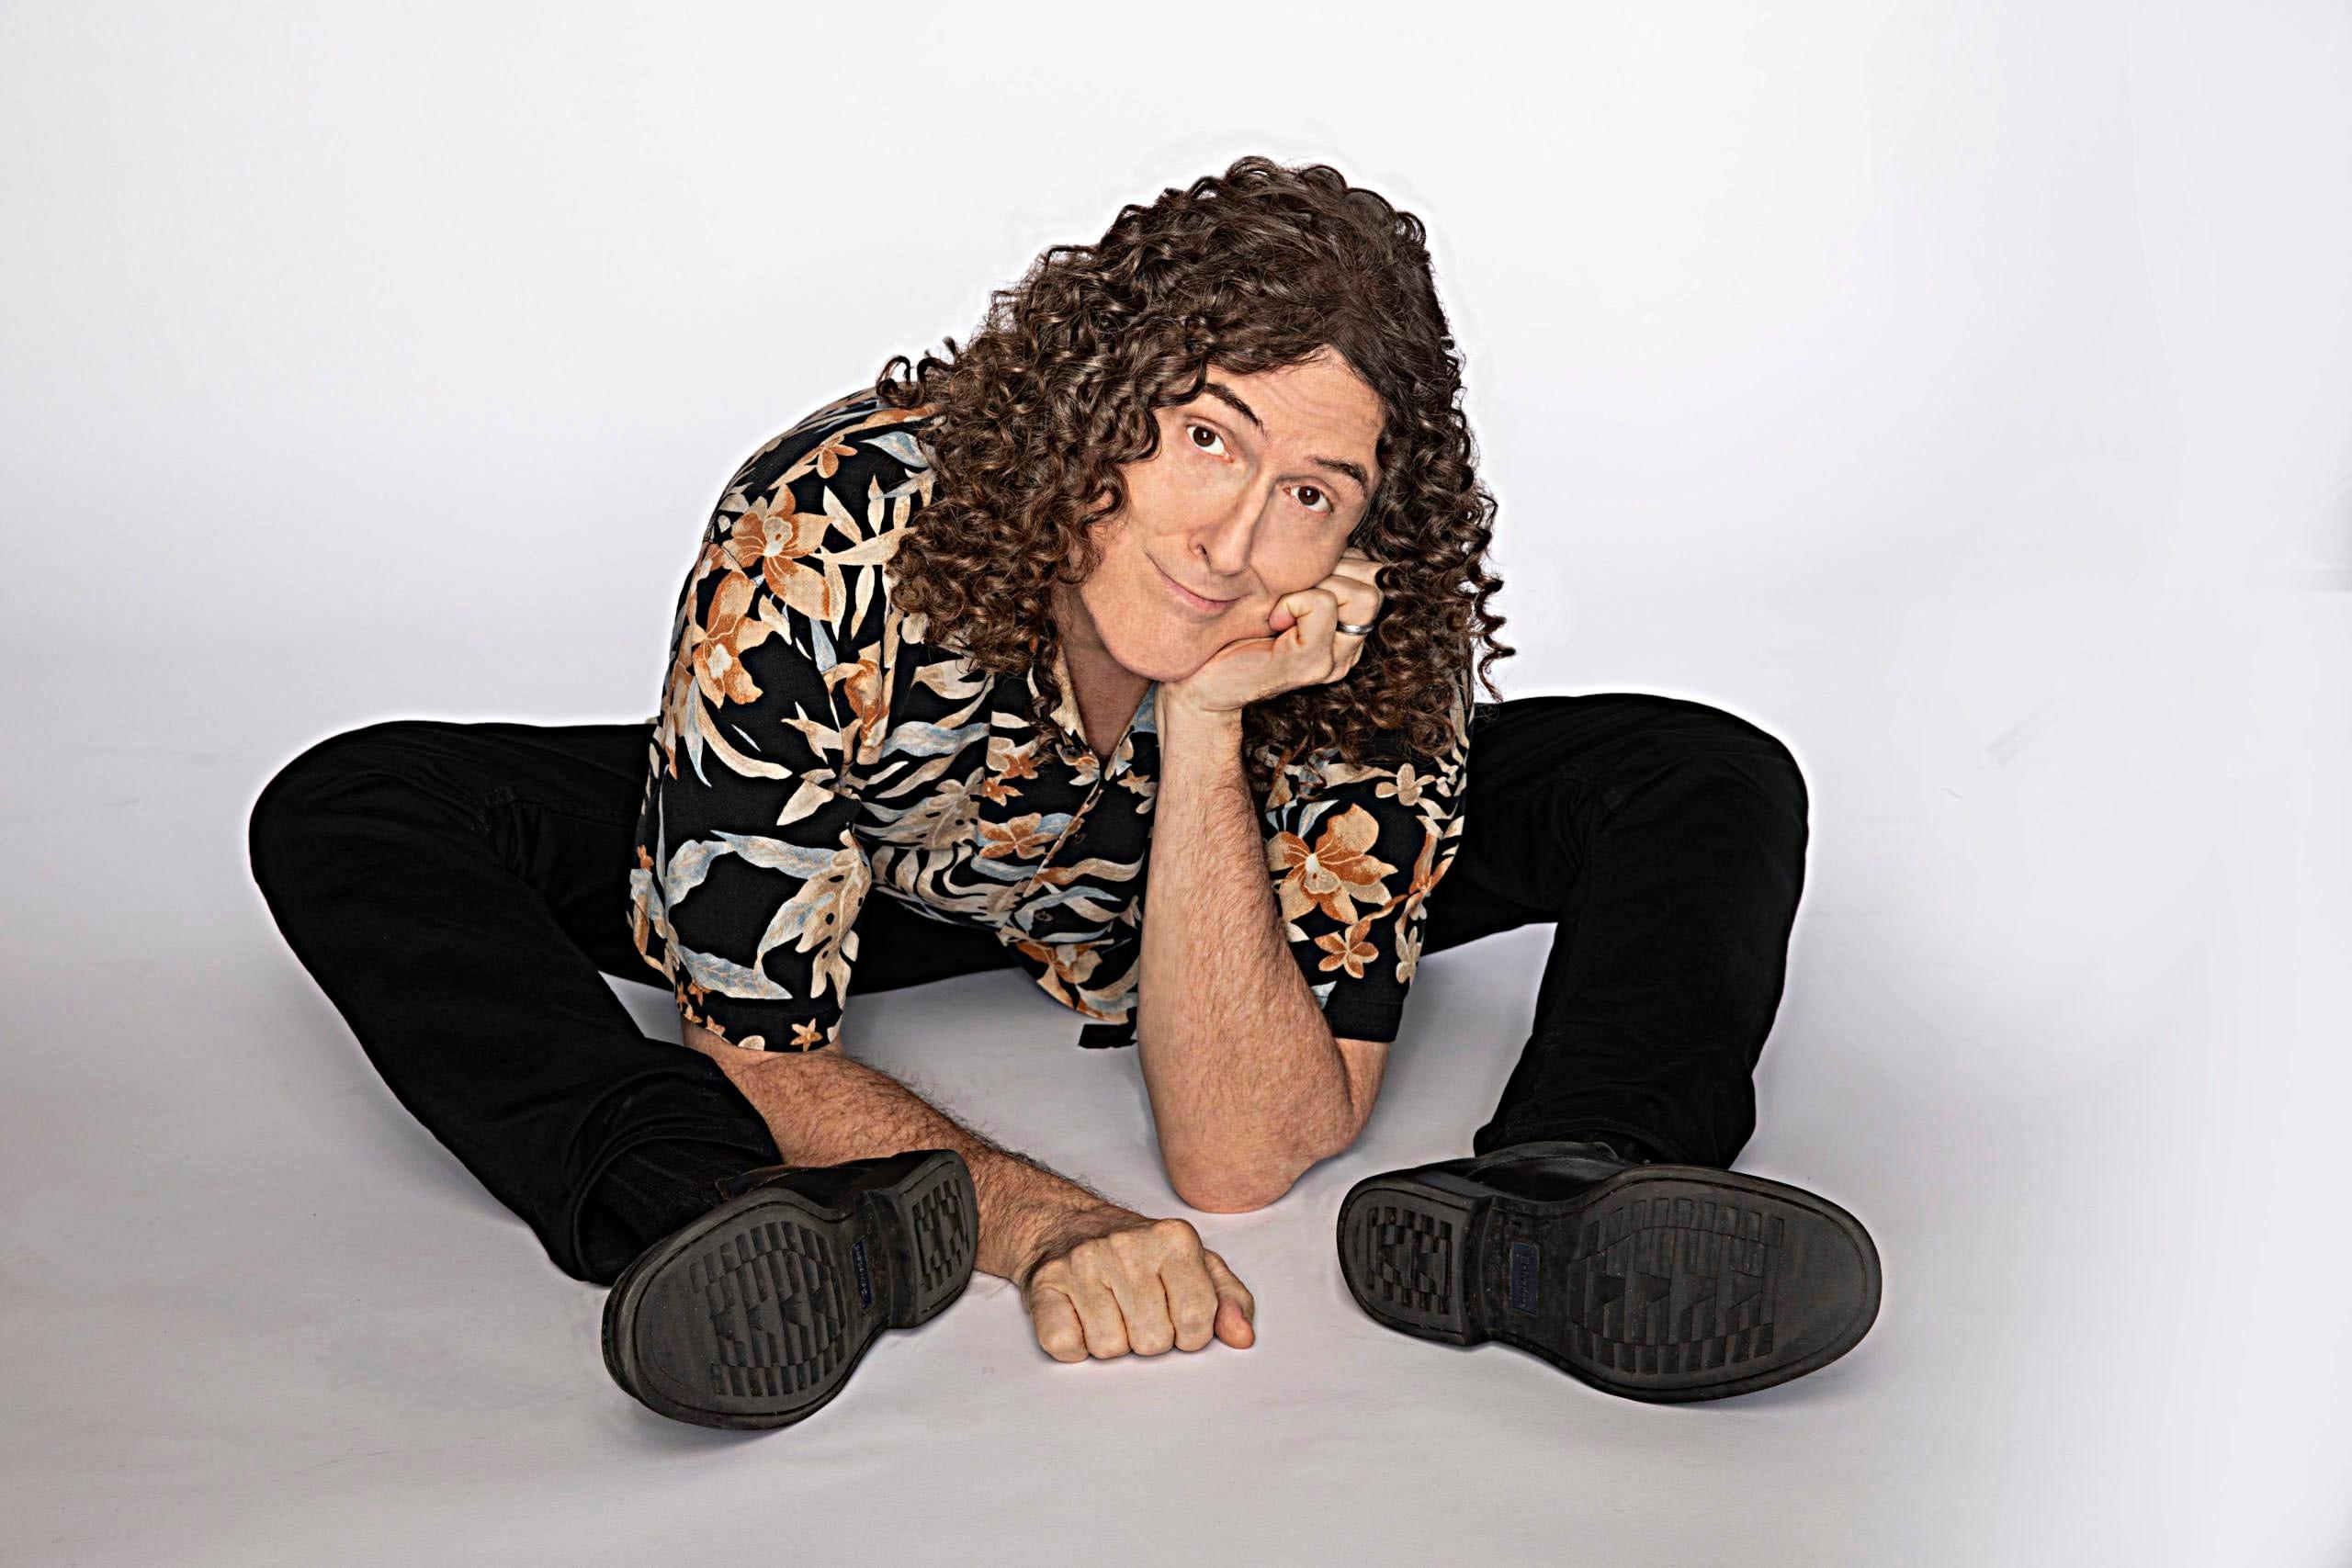 "Weird Al" Yankovic is headed to Erie, bringing "The Unfortunate Return of the Ridiculously Self-Indulgent, Ill-Advised Vanity Tour" to the Warner Theatre in May 2022.